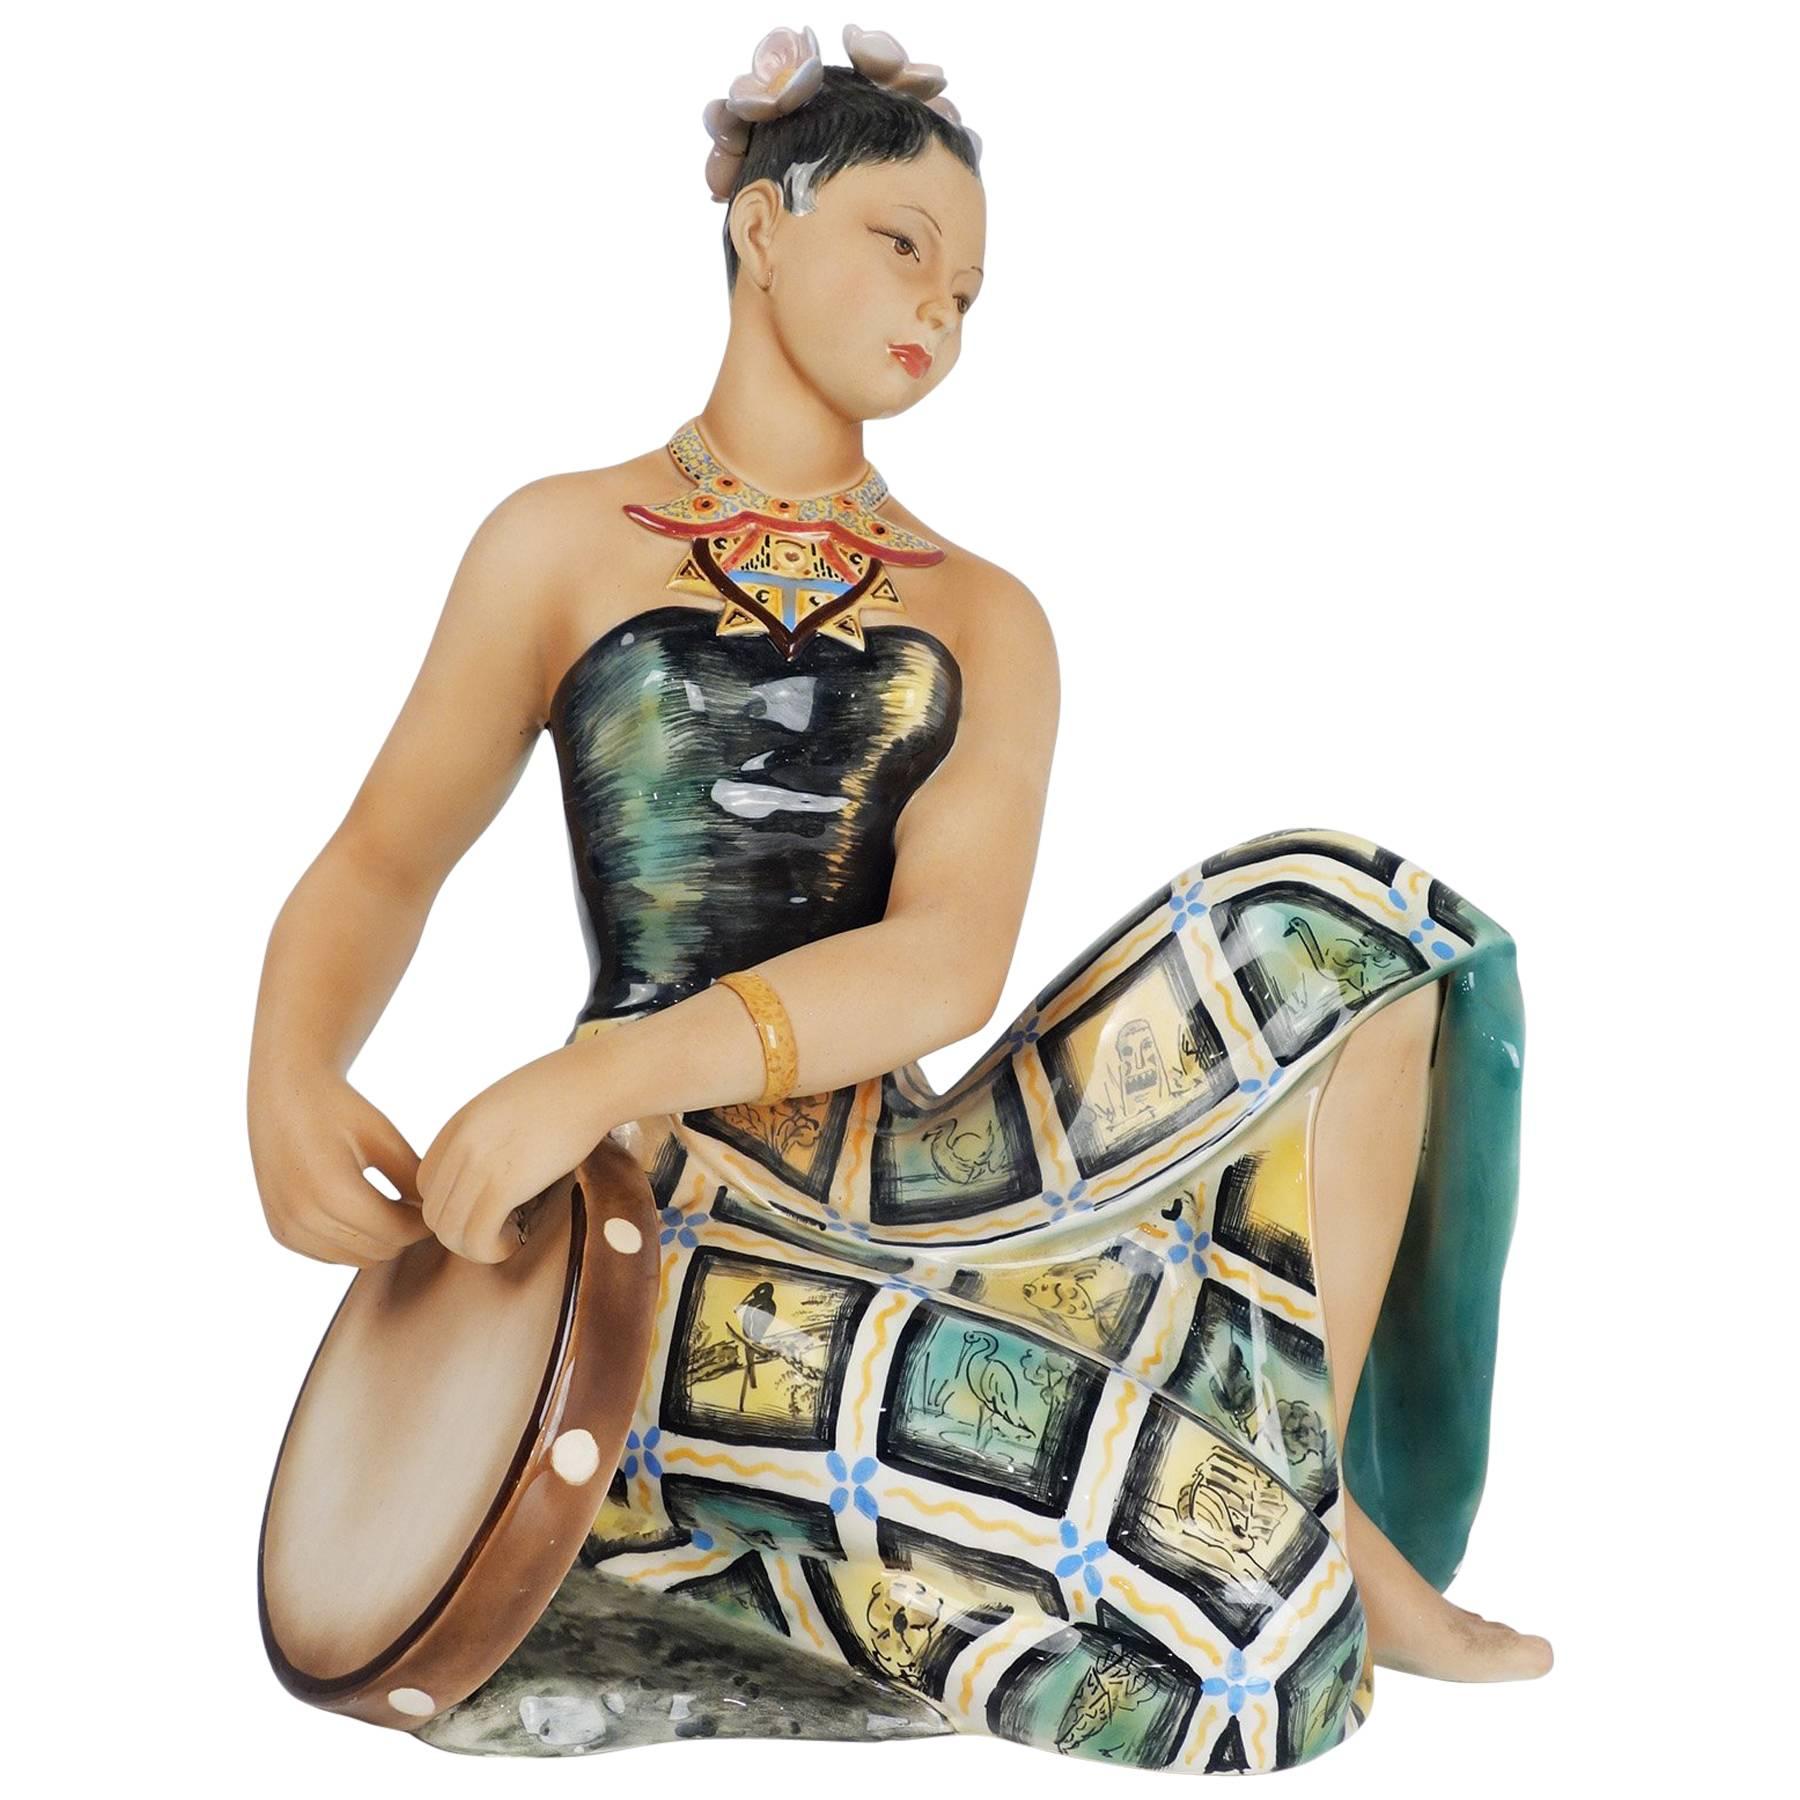 'Penida' Figurine from the 1940s by Le Bertetti For Sale